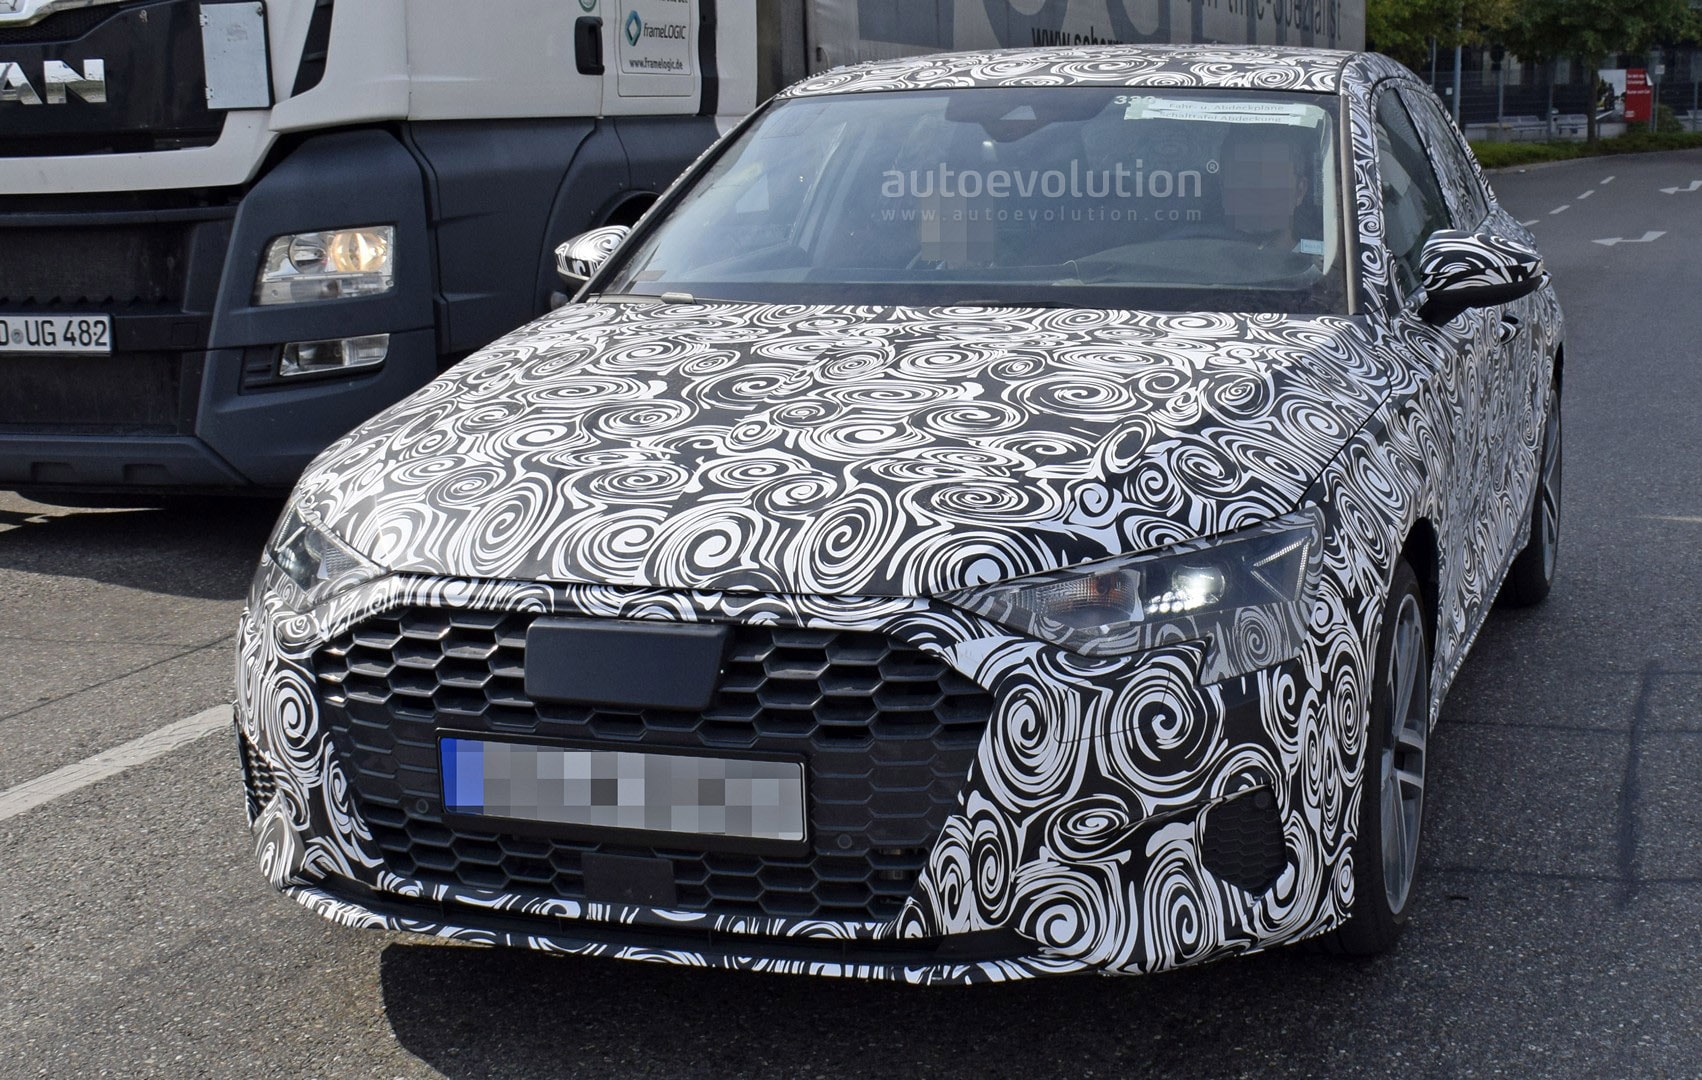 New Audi A3 2020 New 2020 Audi A3 Spied Testing 2019 08 19